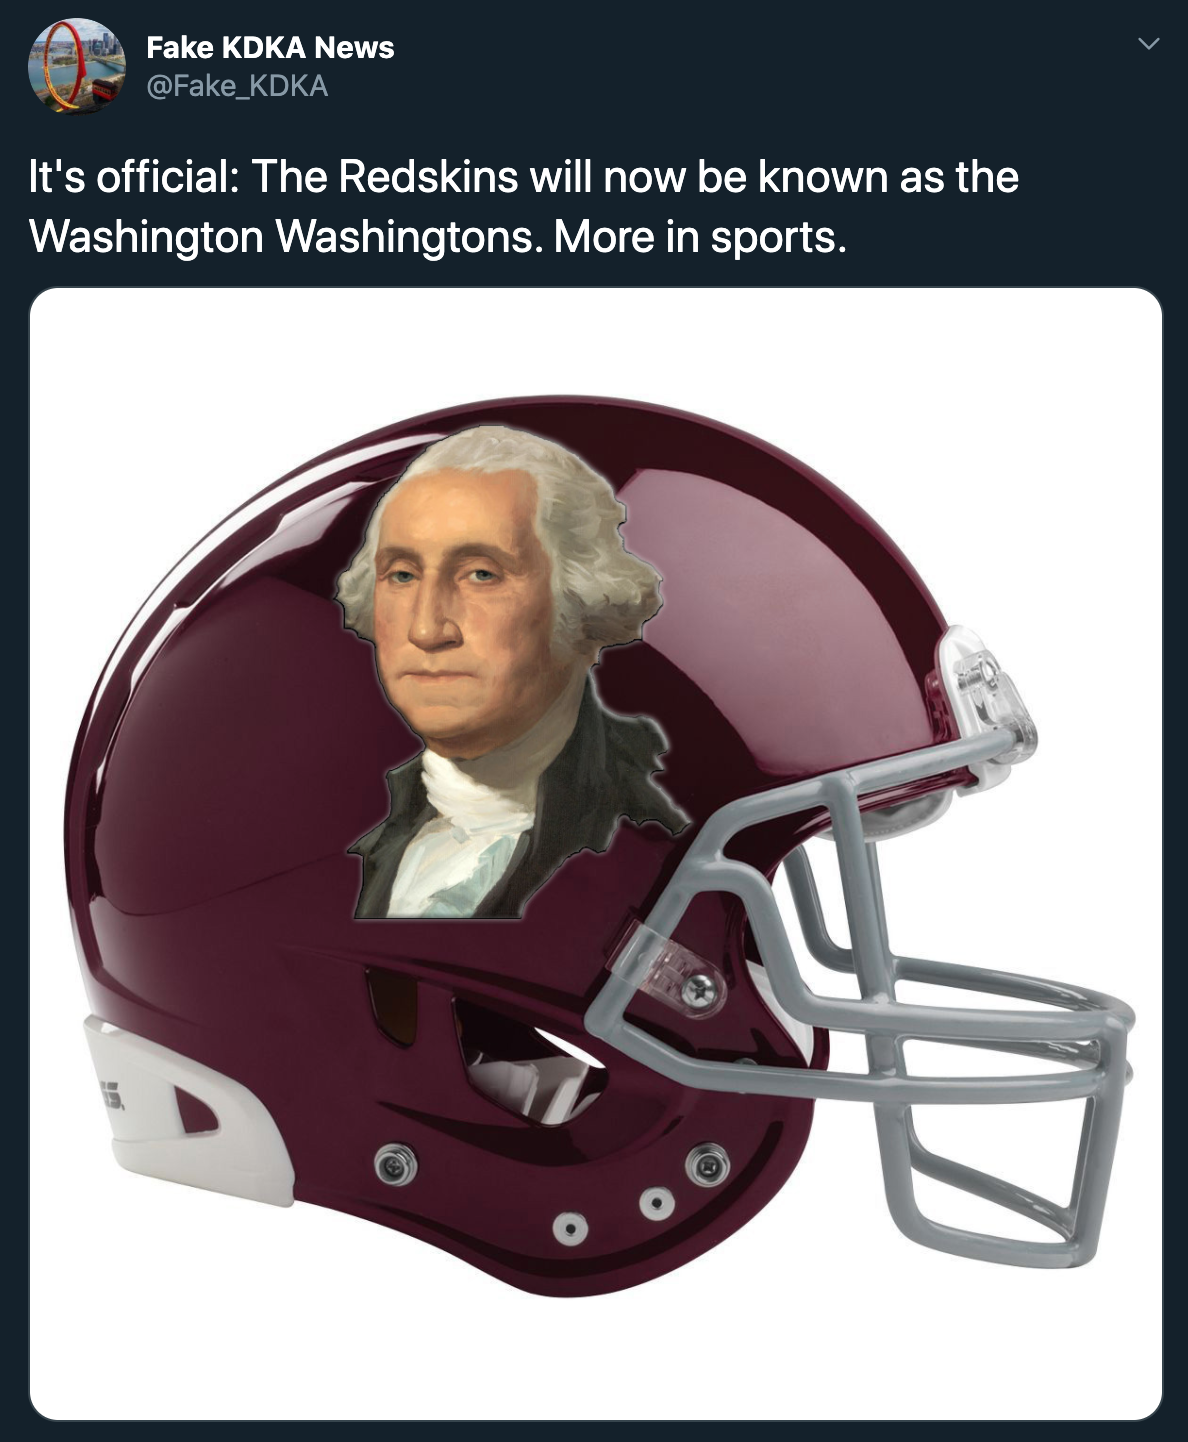 It's official The Redskins will now be known as the Washington Washingtons. More in sports.